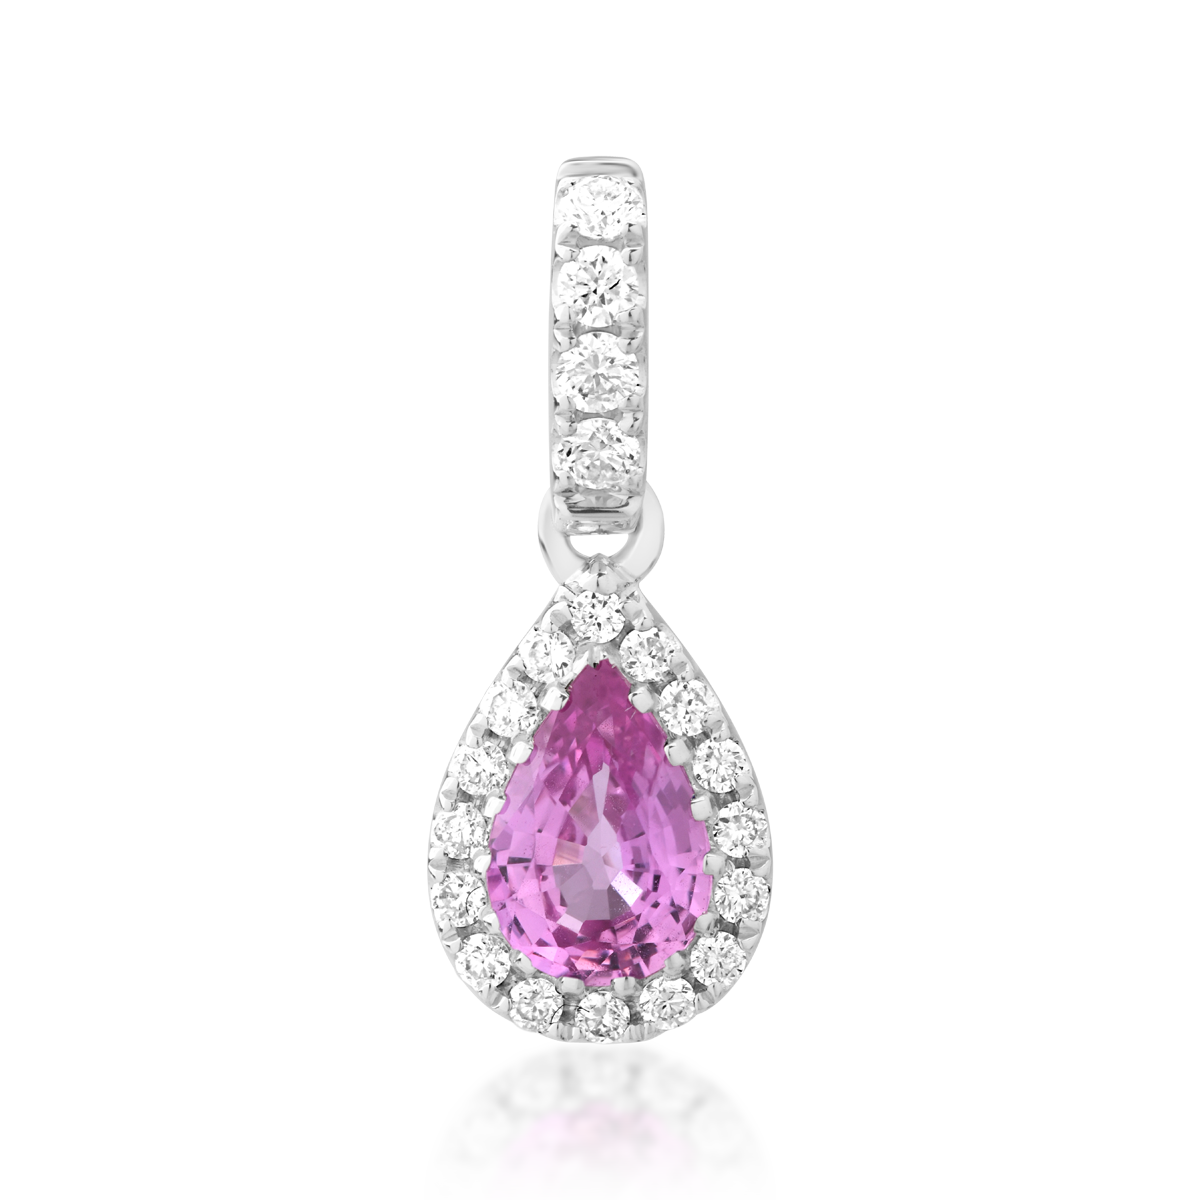 18K white gold pendant with 0.5ct pink sapphire and 0.12ct diamonds